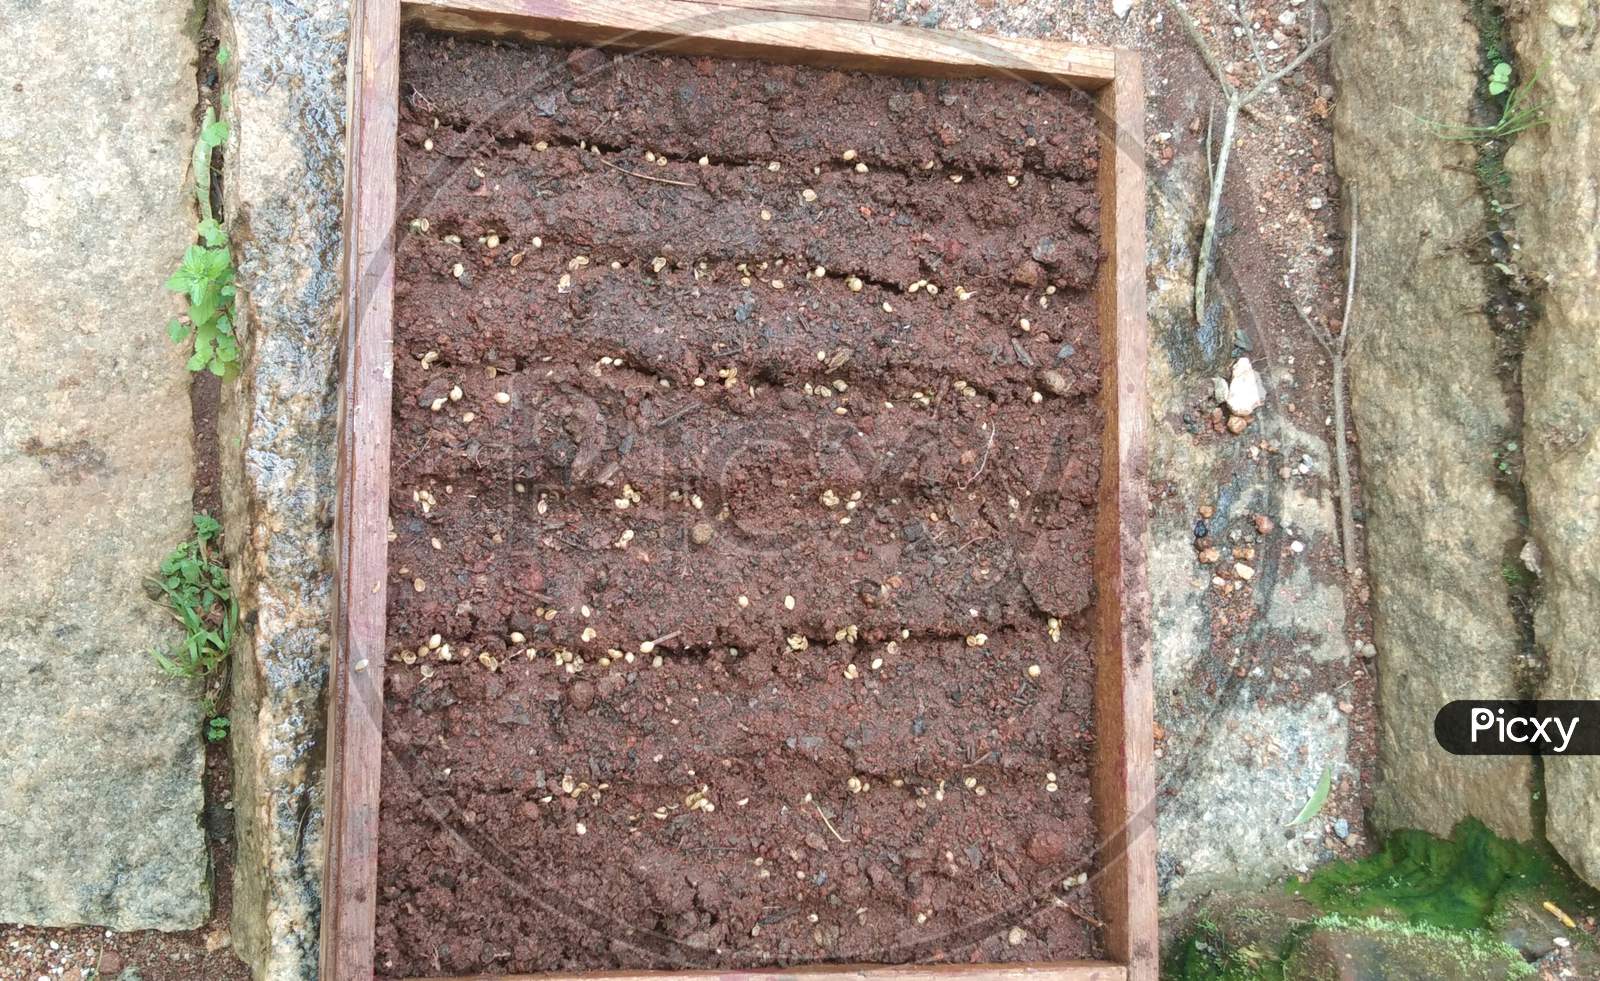 Coriander seeds in the soil